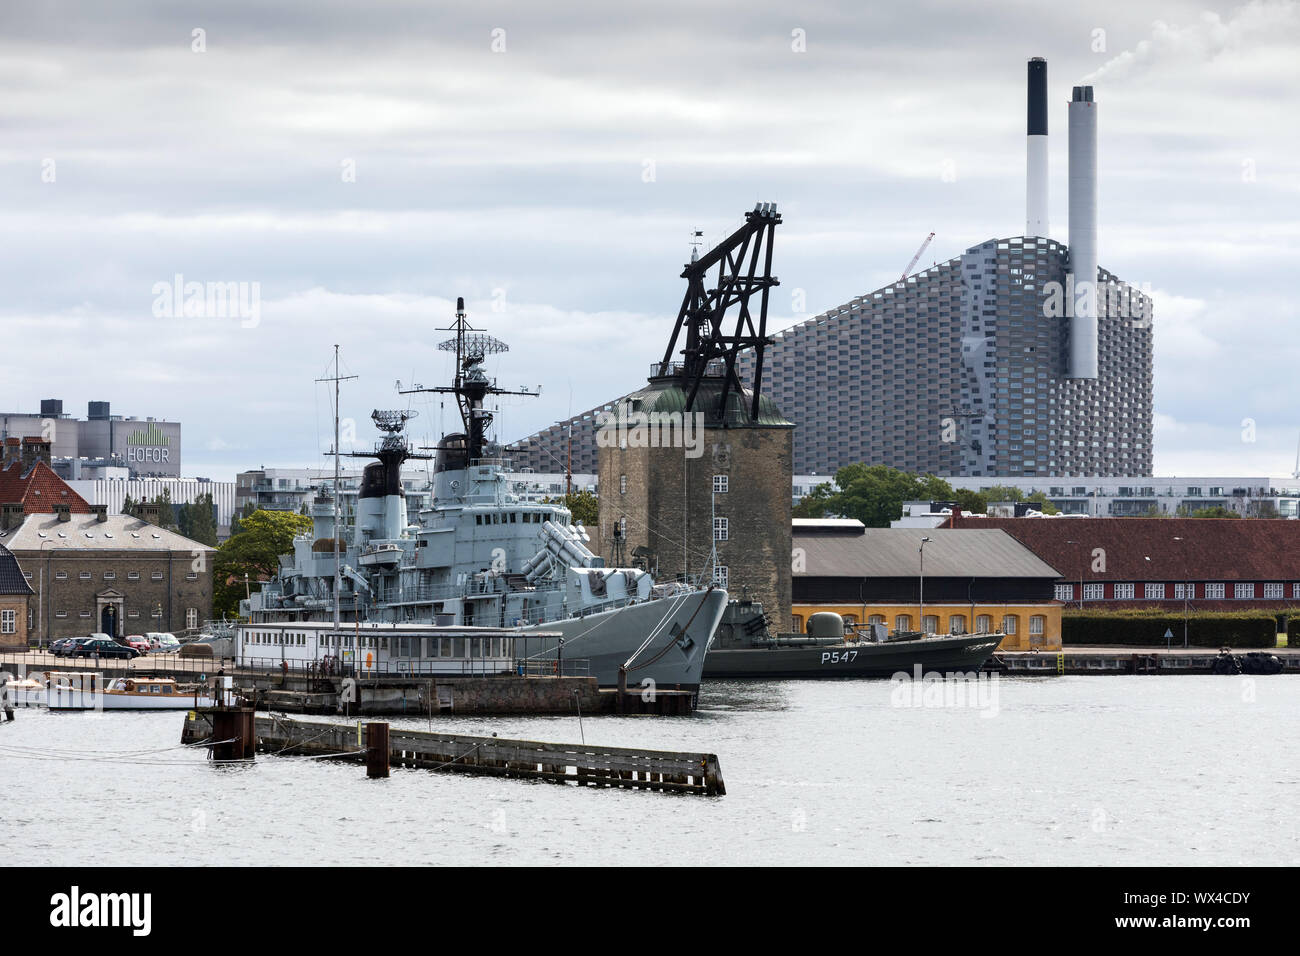 A warship moored in the harbour at Amager, Copenhagen, Denmark, with the Amager Bakke incinerator and ski slope in the distance Stock Photo